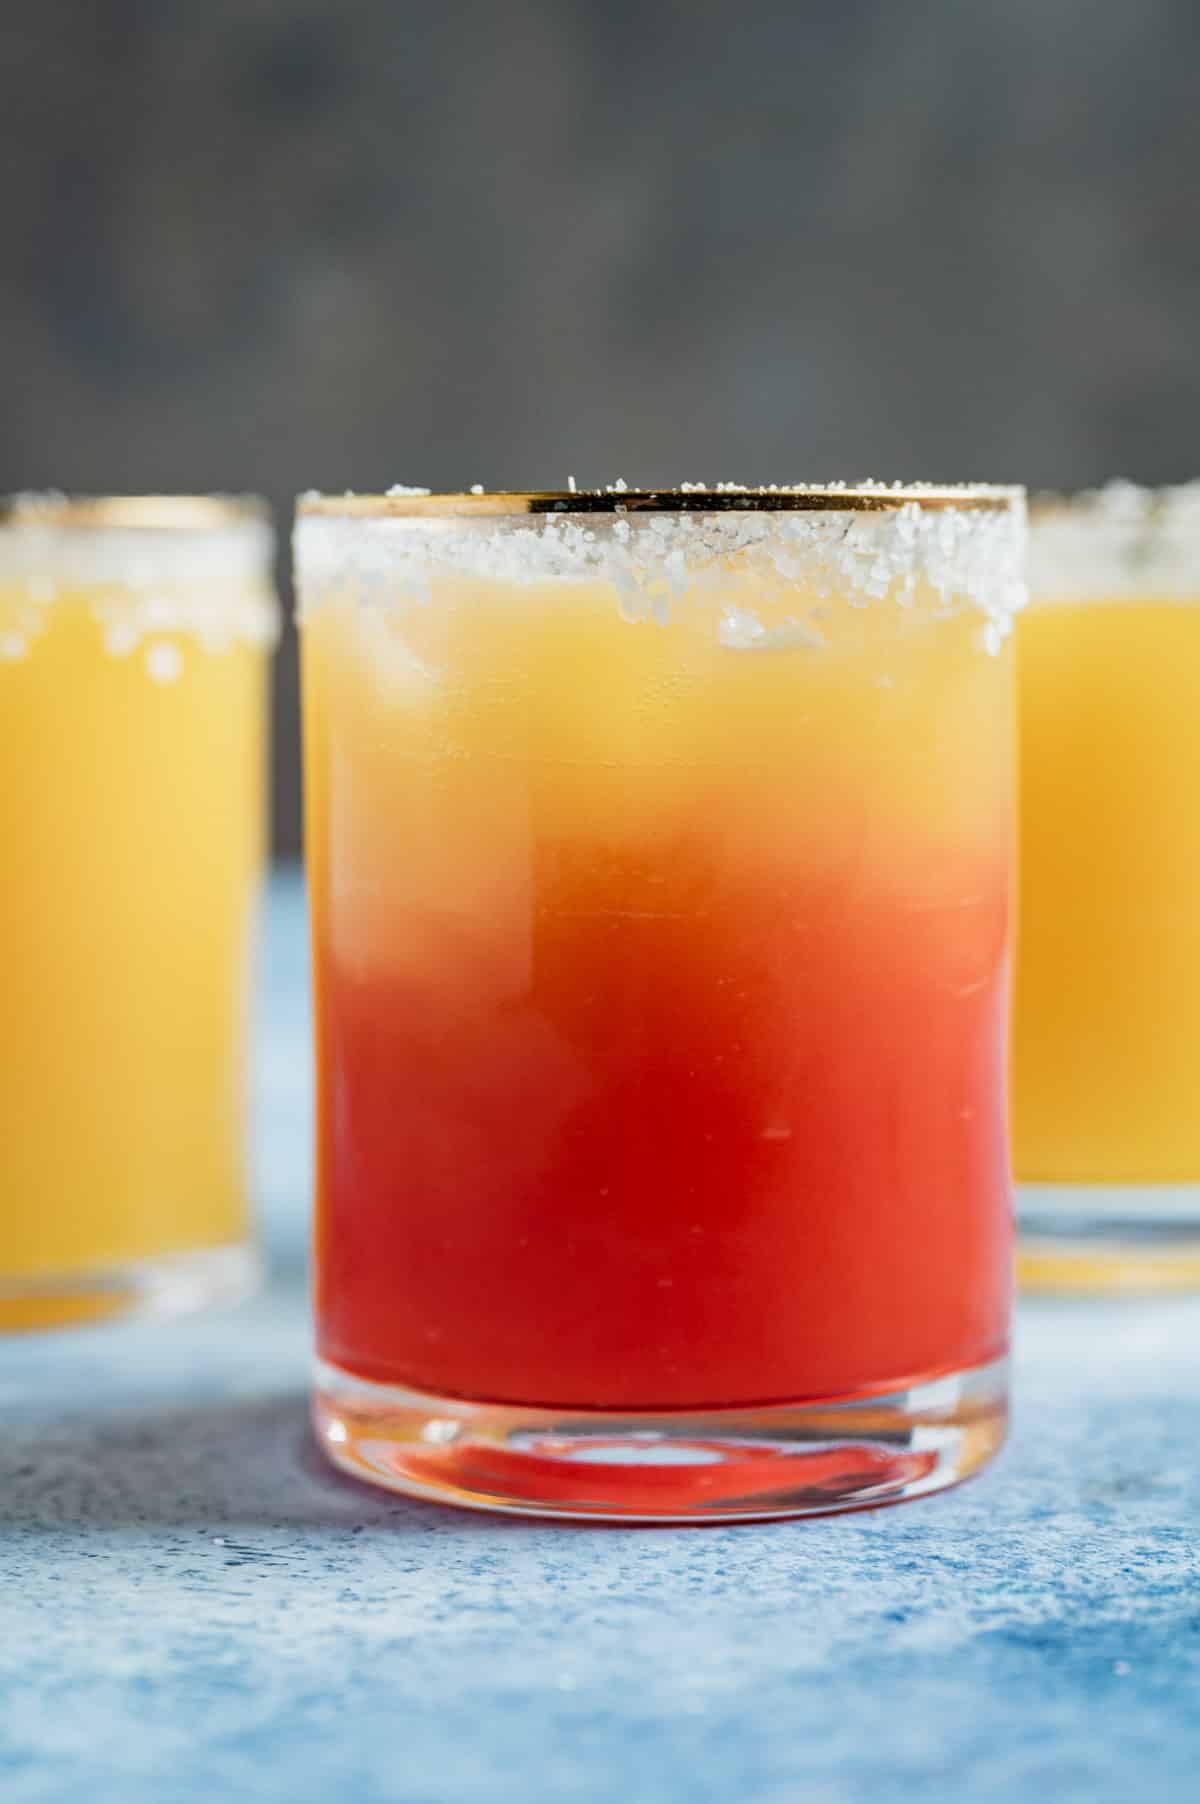 Peach Tequila Sunrise Punch - Cocktail Recipes